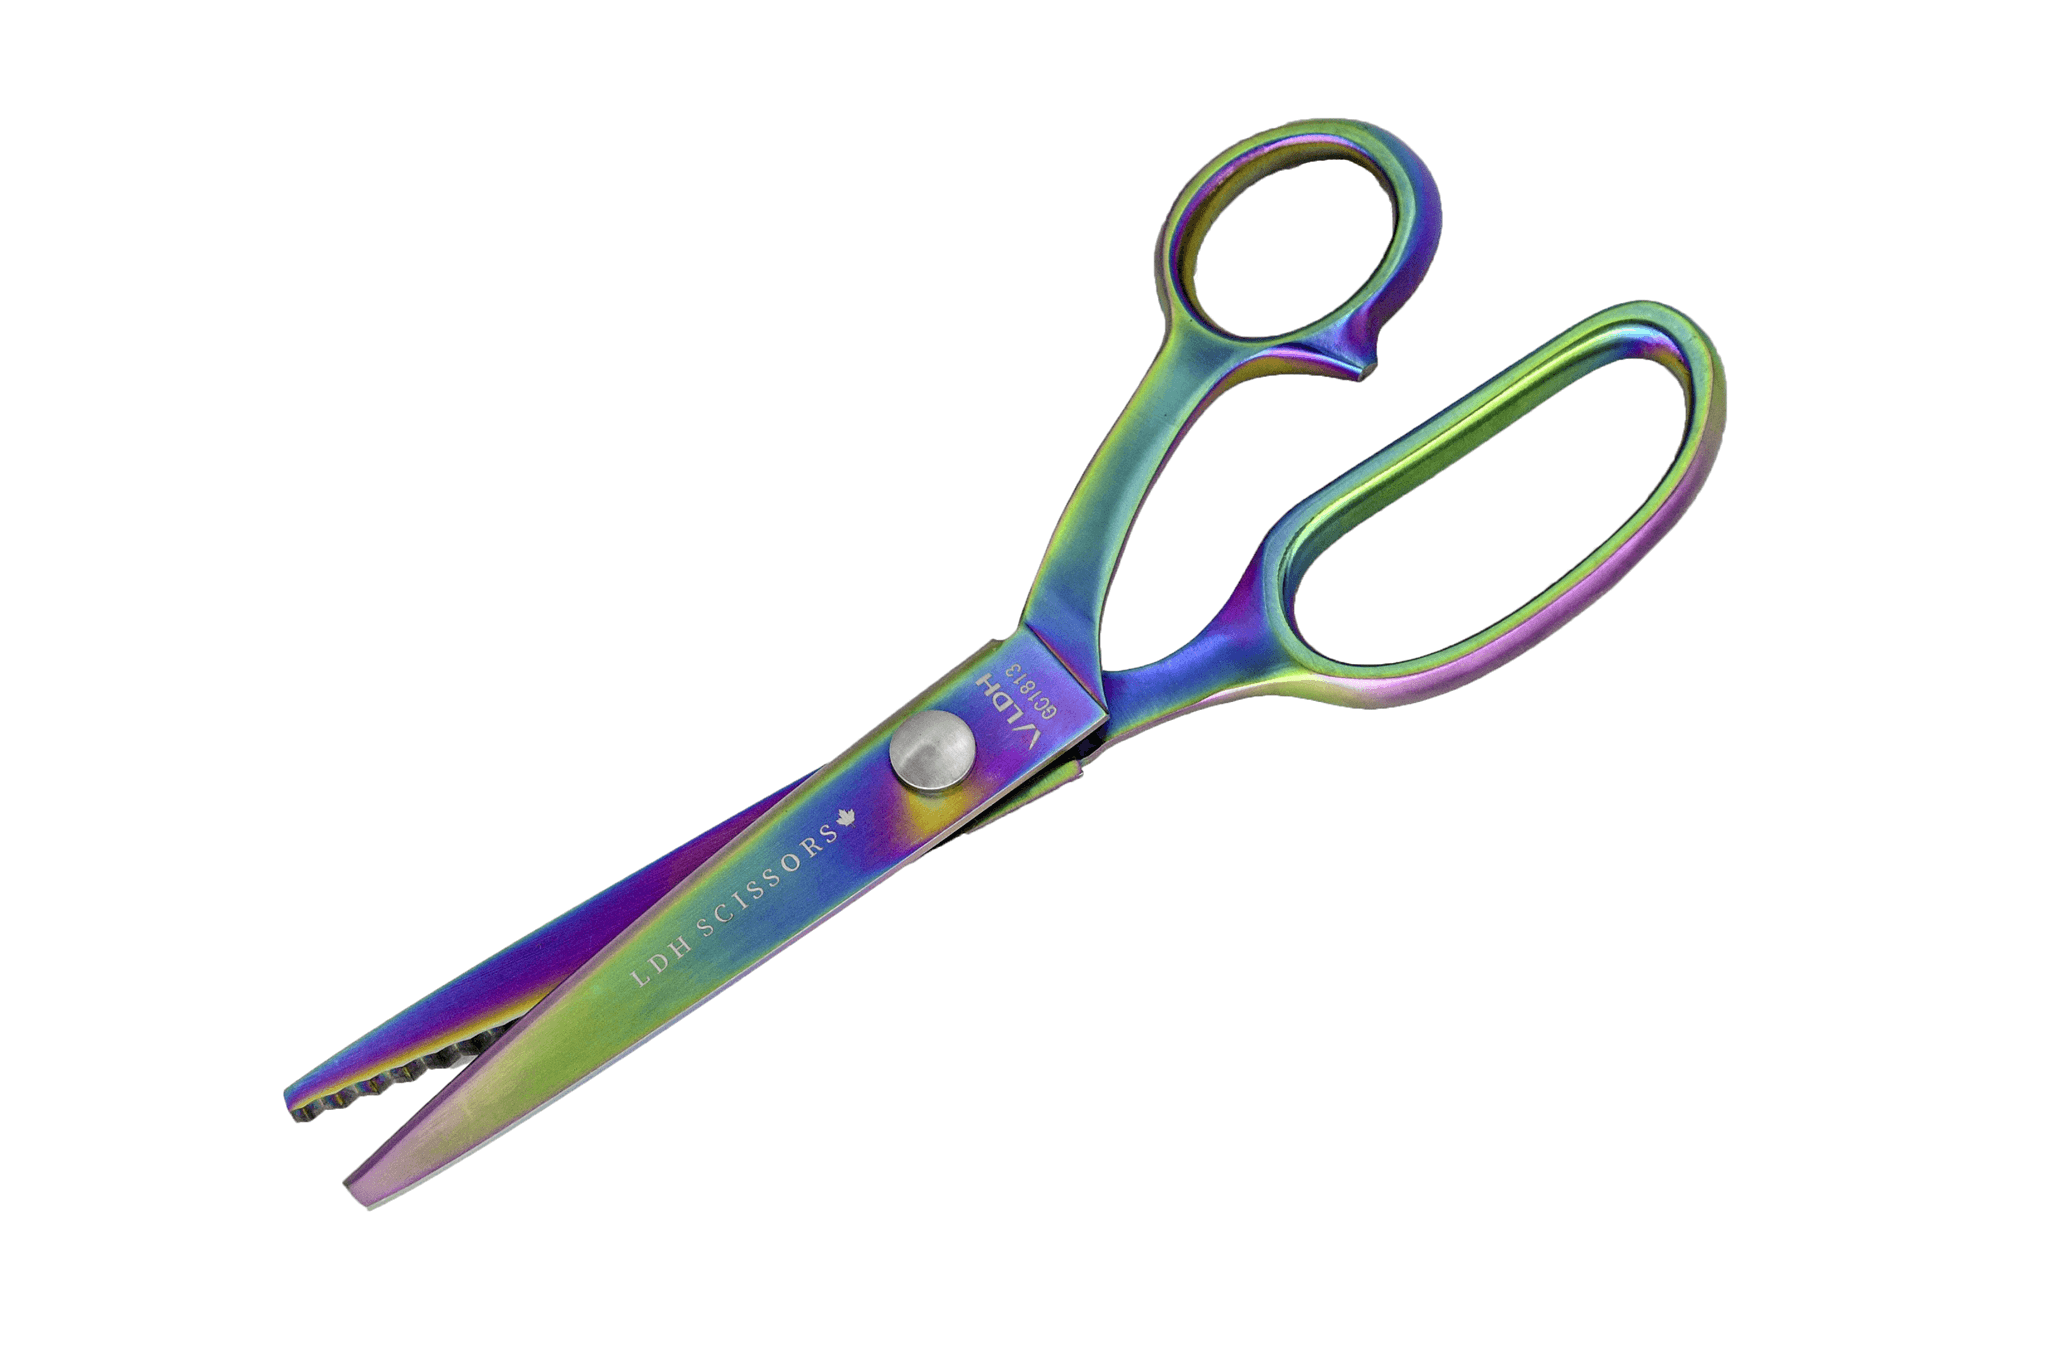 Great Choice Products Pinking Shears Scissors For Fabric, Craft